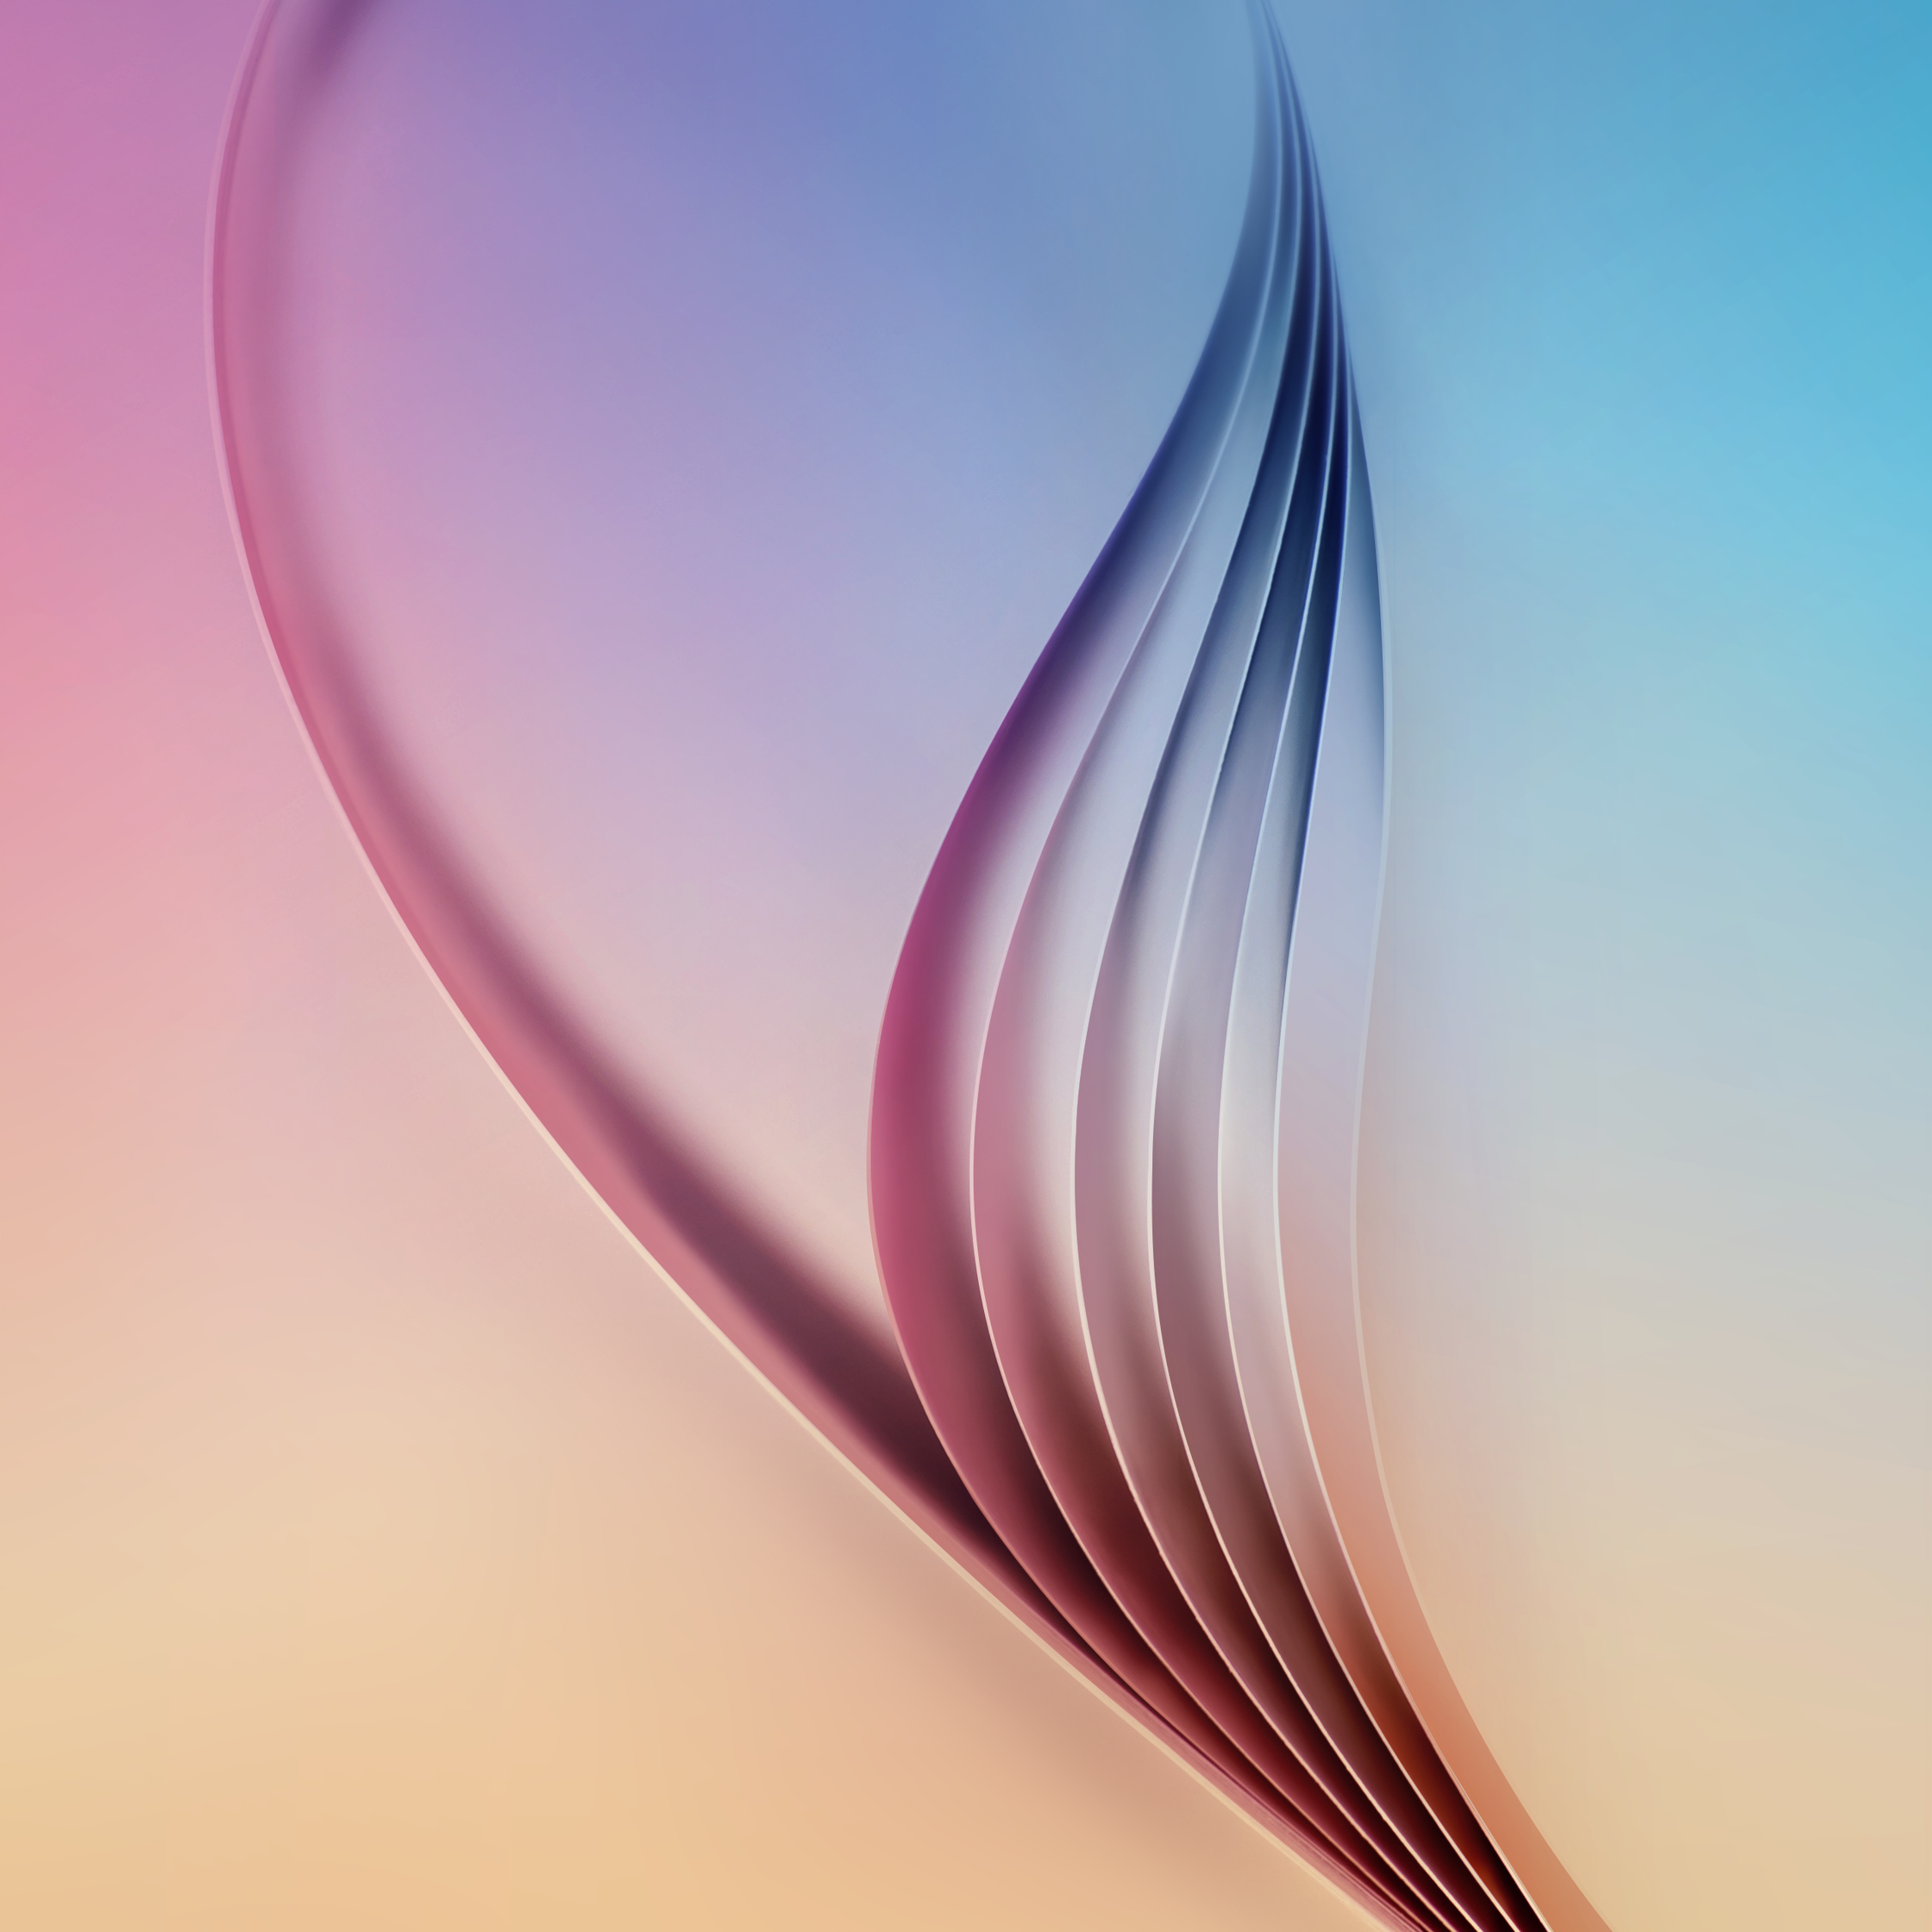 Default Samsung Galaxy S6 And Edge Wallpaper Show Up